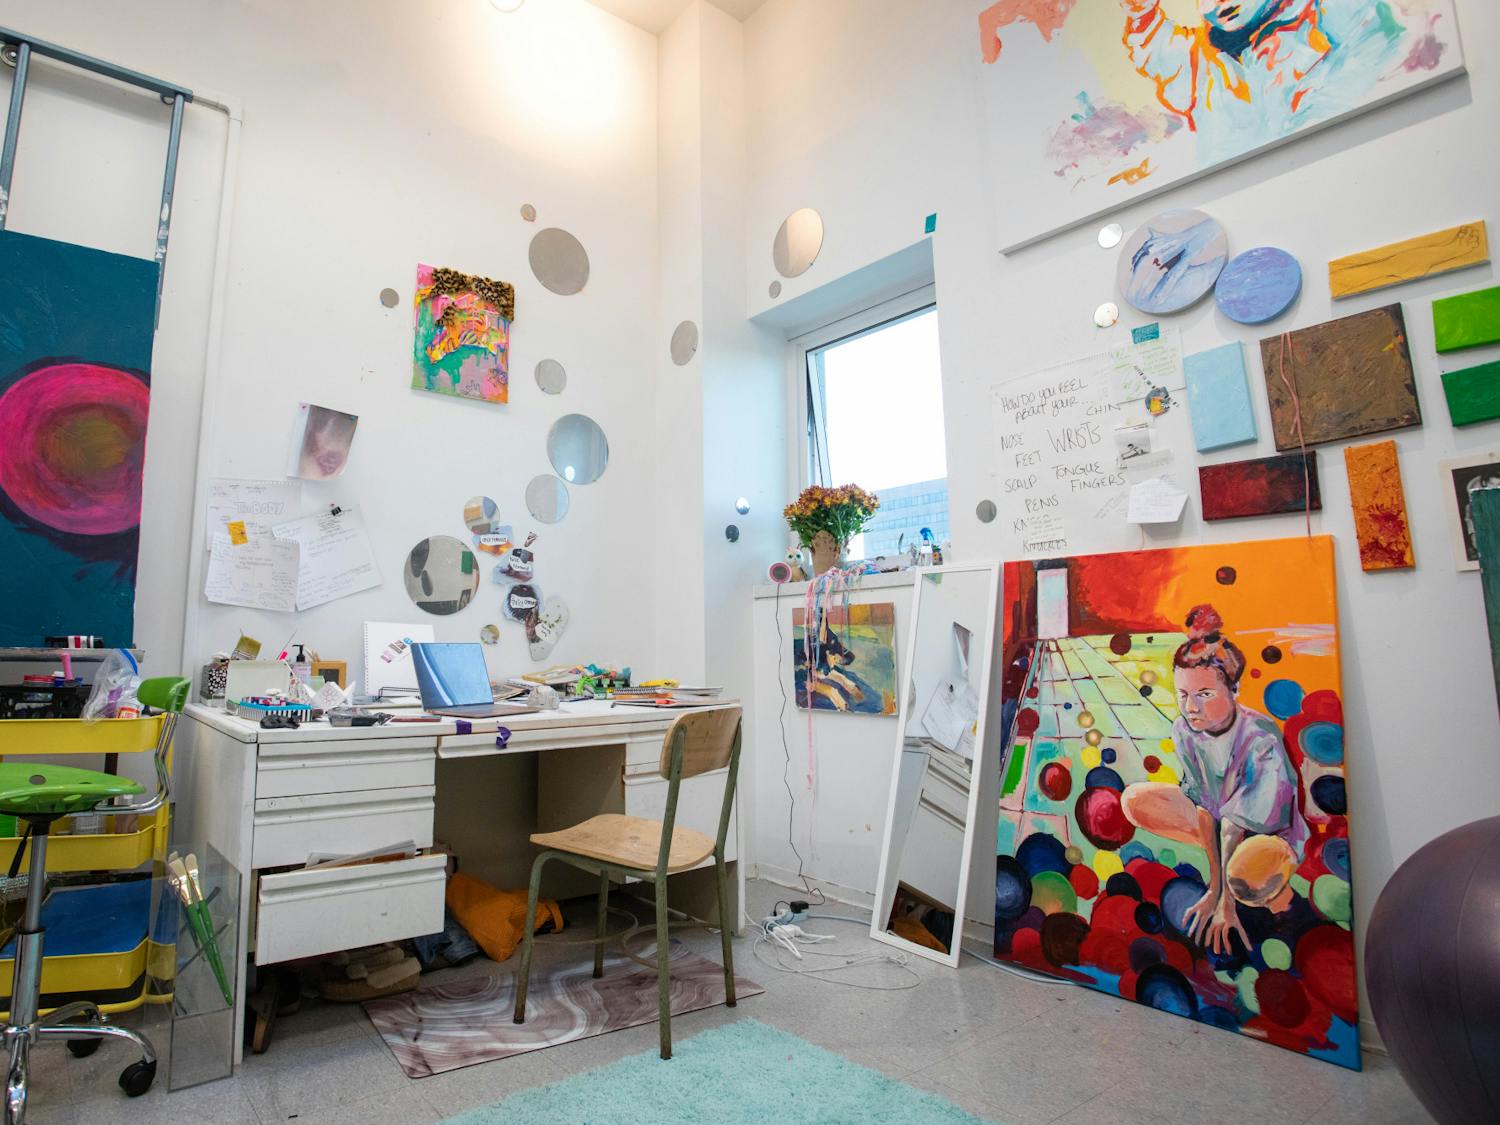 A look inside the studio of MFA candidate and graduate student worker, Ali Lazik, during UB's annual Art in the Open event.